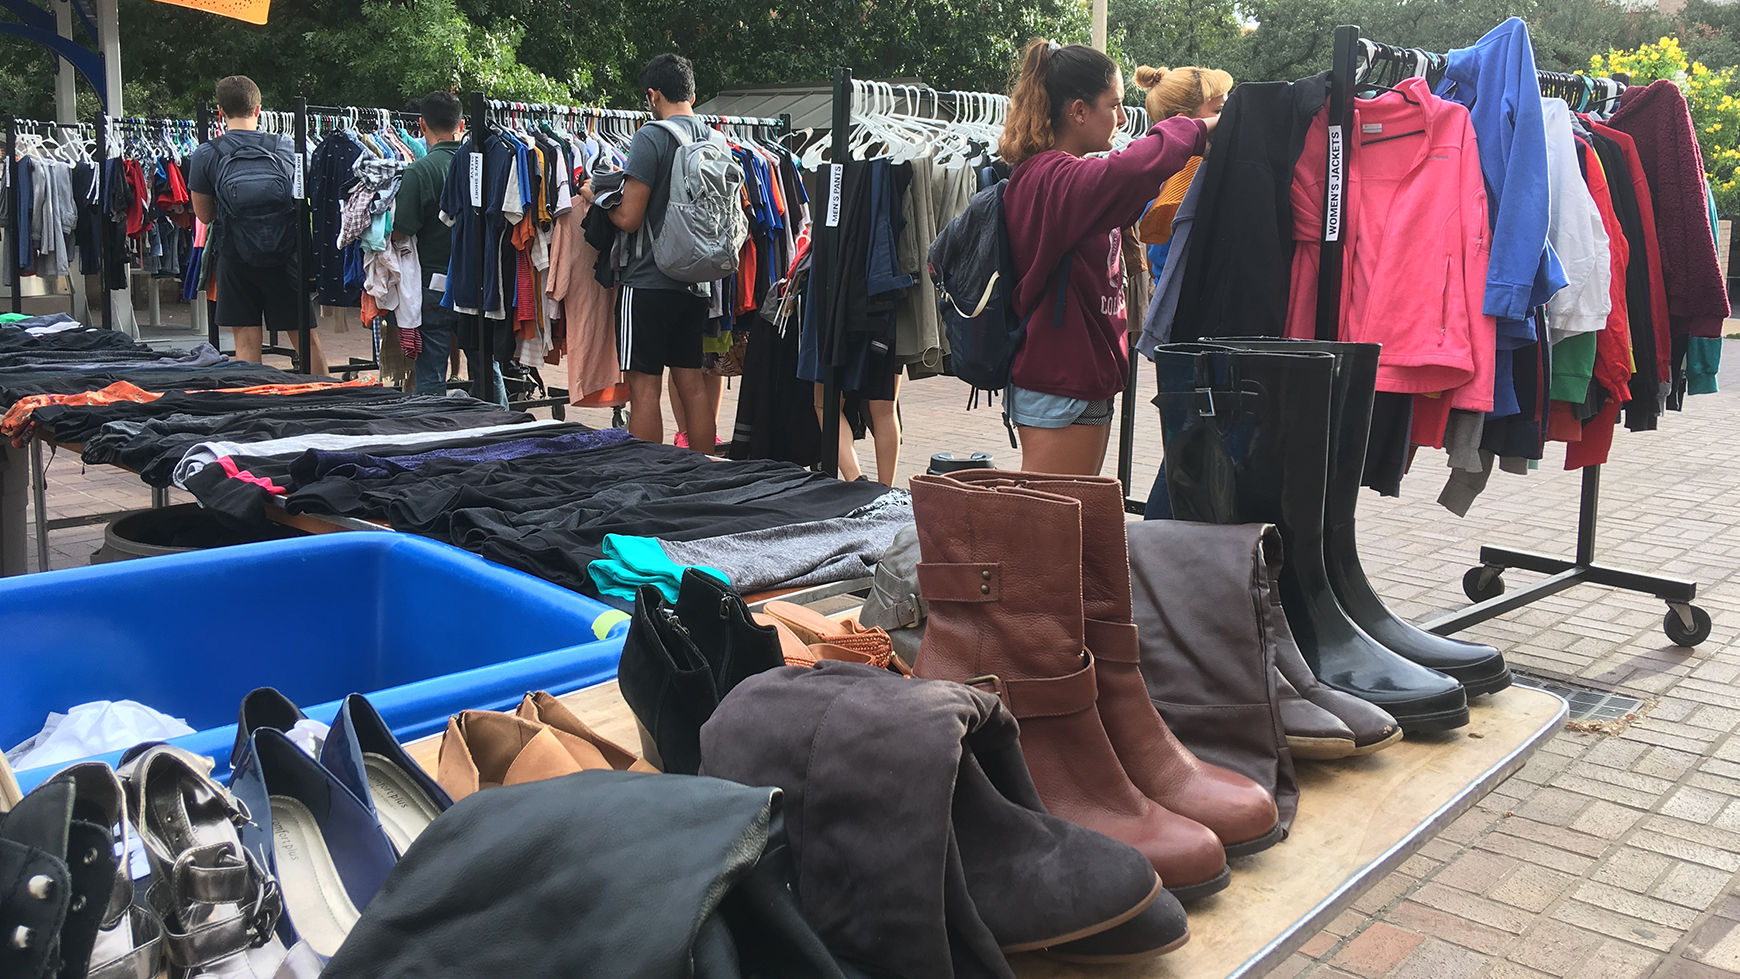 Students browse clothes at pop-up thrift sale